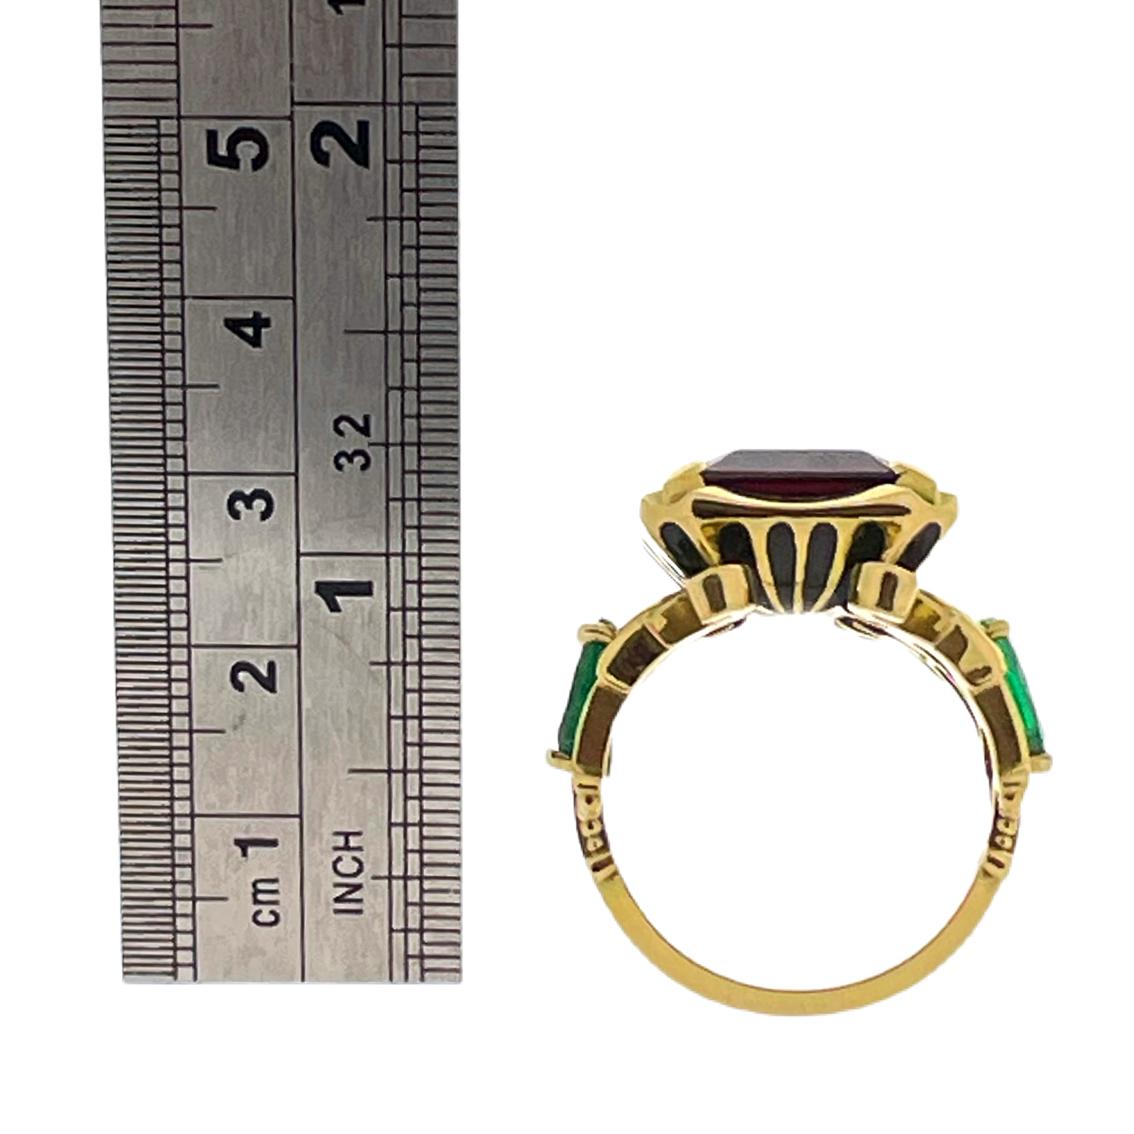 7.9ct Garnet, 1.65cts Emeralds, Enamel, & 18kt Yellow Gold Antique Style Ring  For Sale 11